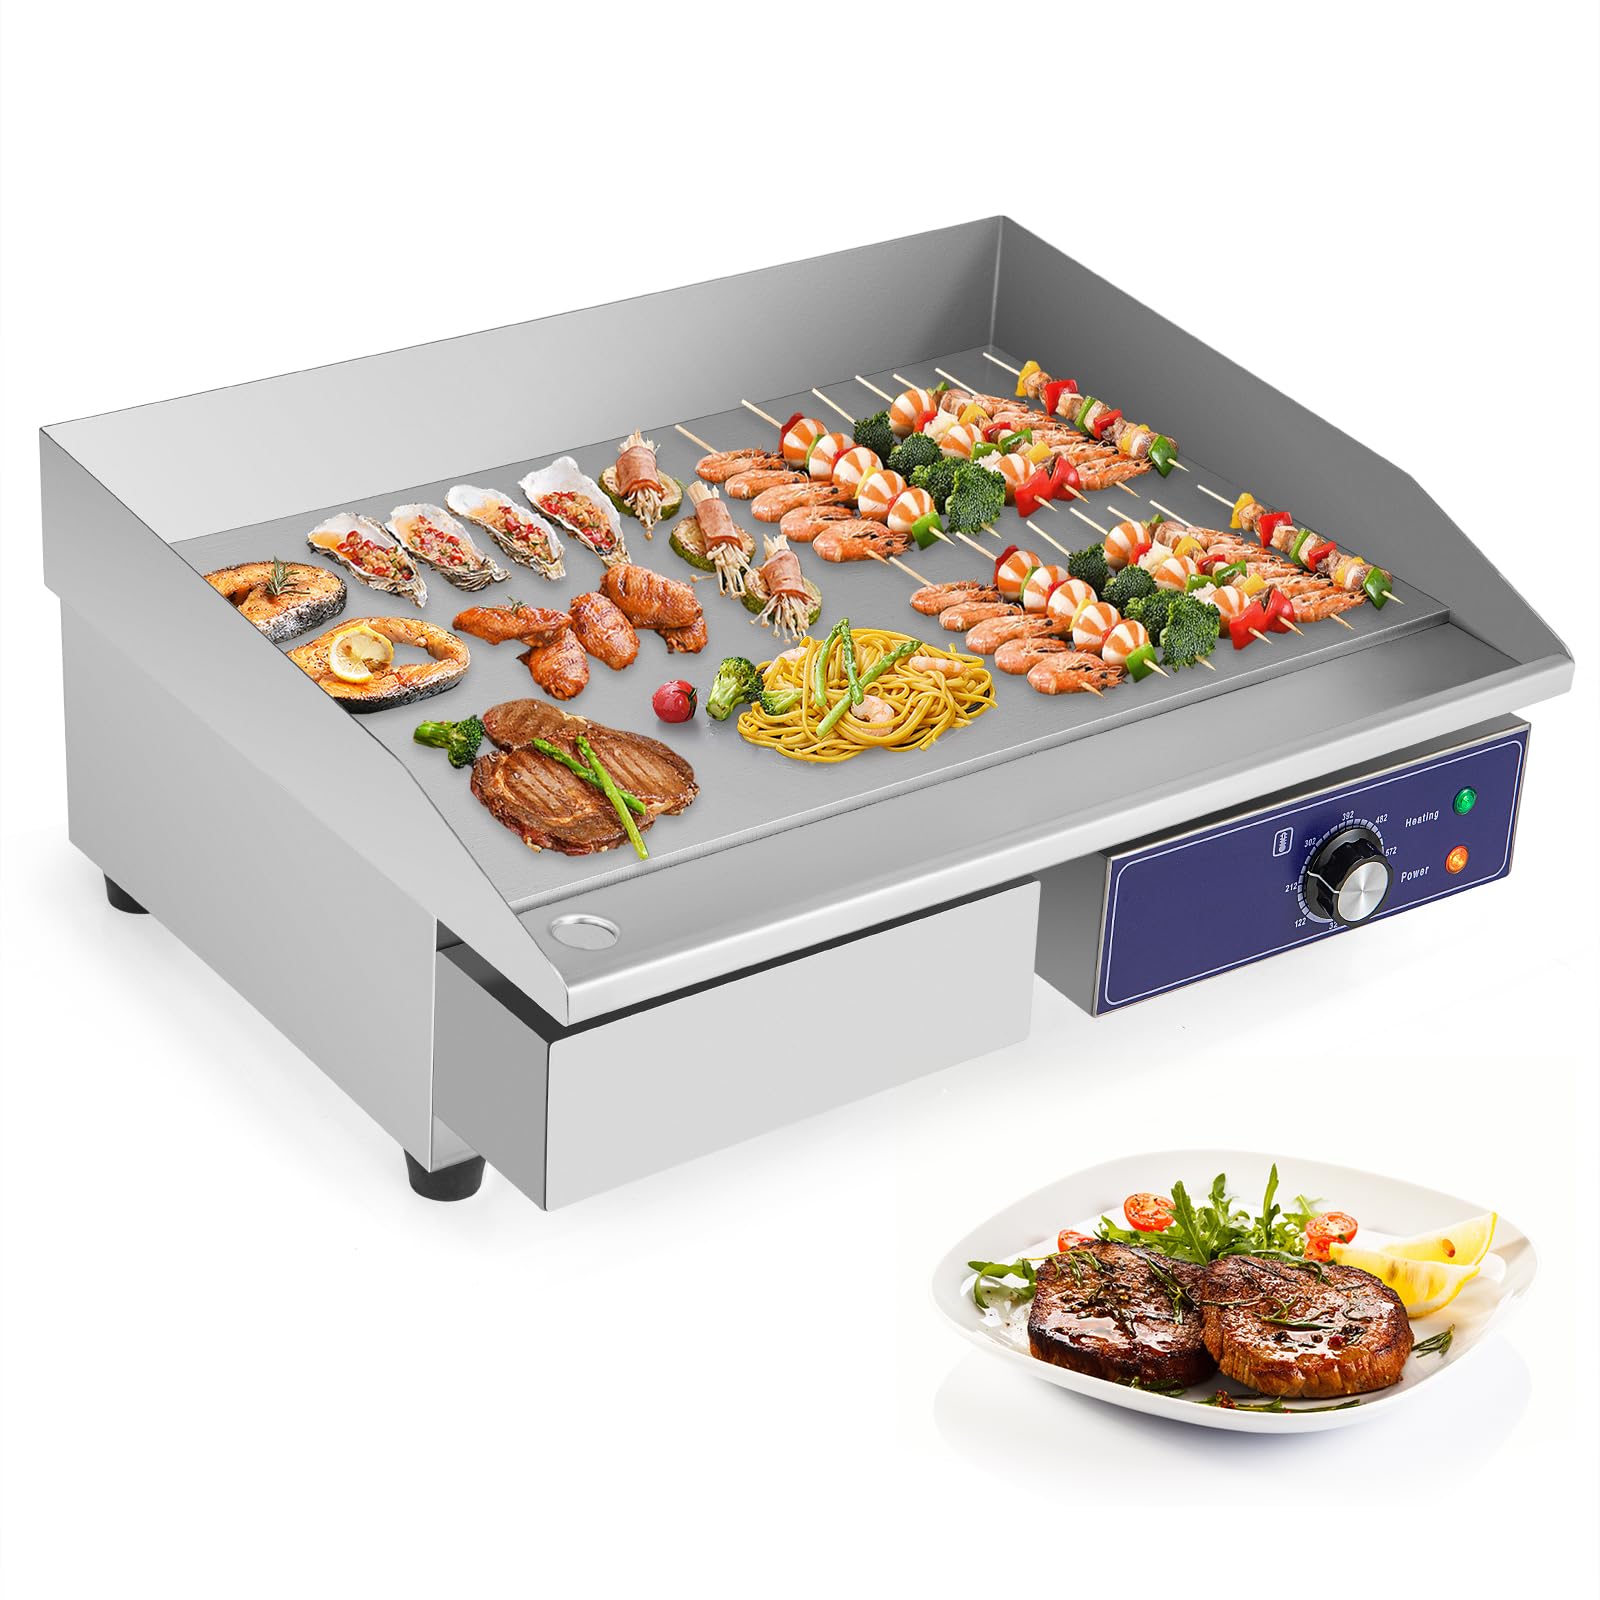 22" Electric Griddle 2000W - Giantex 